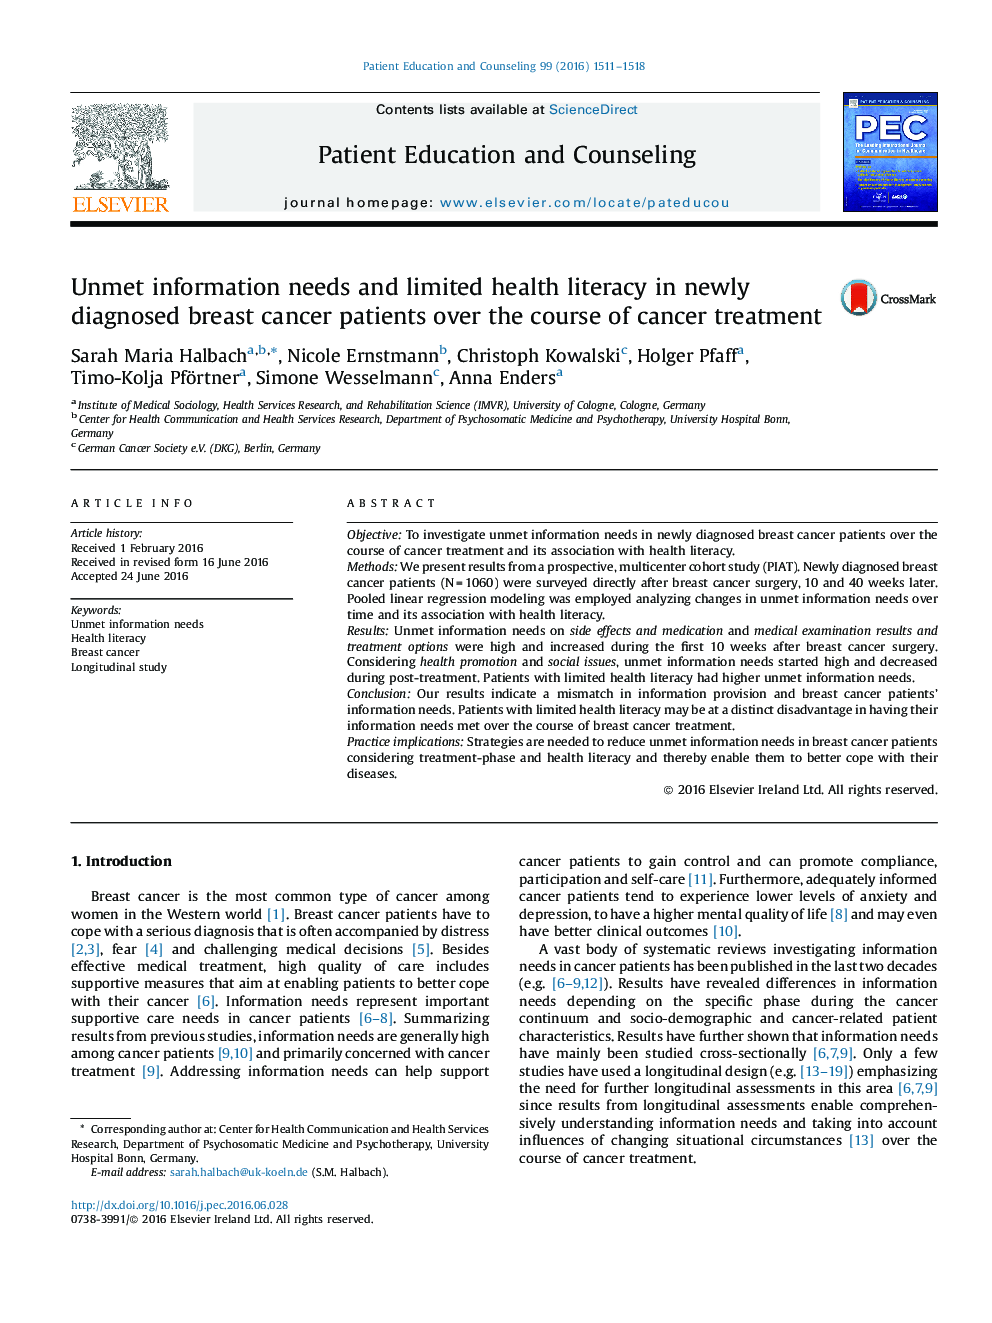 Unmet information needs and limited health literacy in newly diagnosed breast cancer patients over the course of cancer treatment